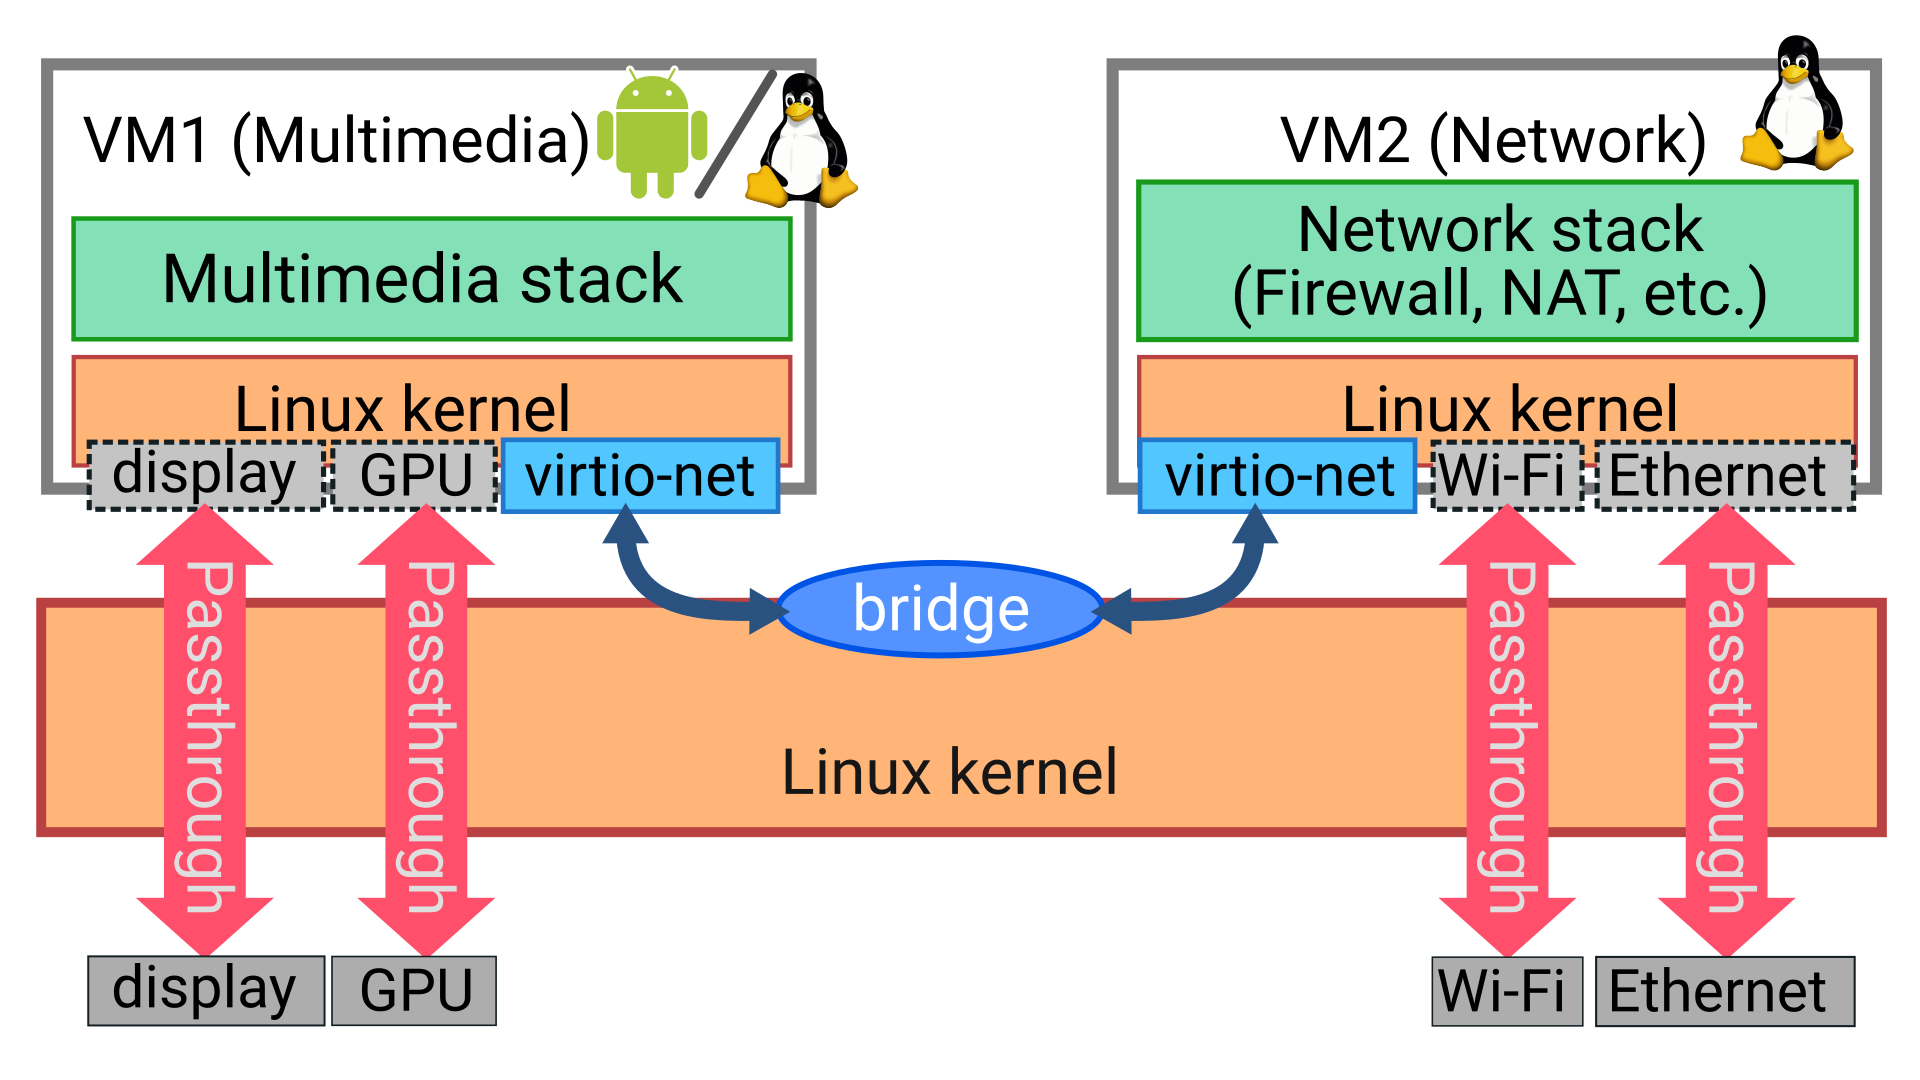 MMB virtualization architecture in two virtual machines with networking, streaming multimedia, android tv, linux